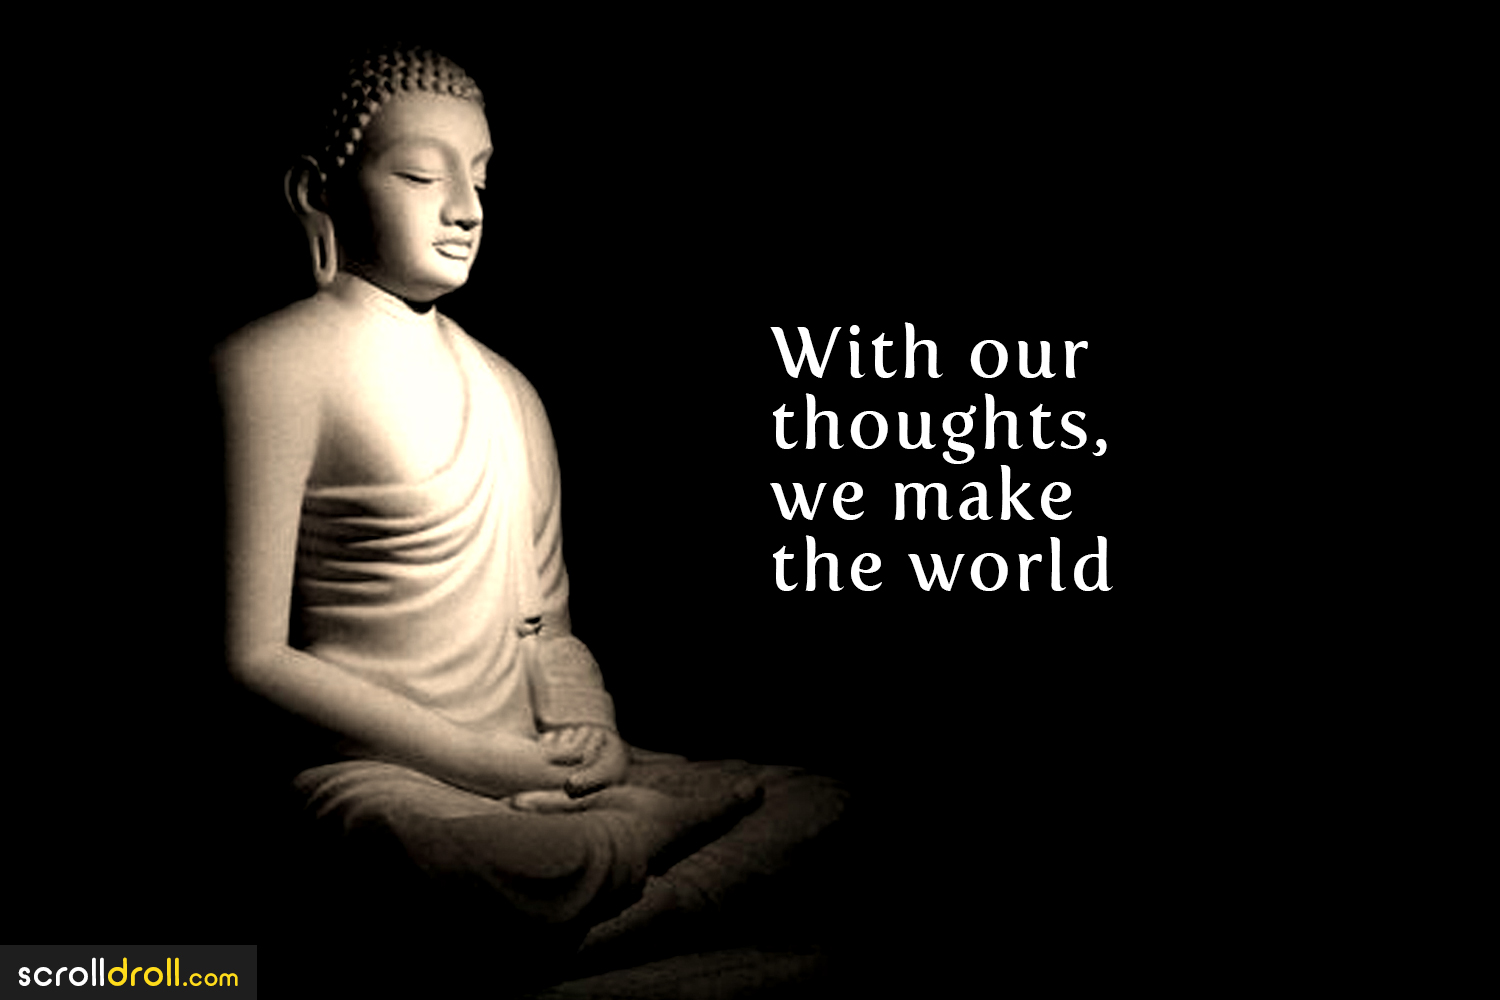 Gautam Buddha Quotes (11) - The Best of Indian Pop Culture ...